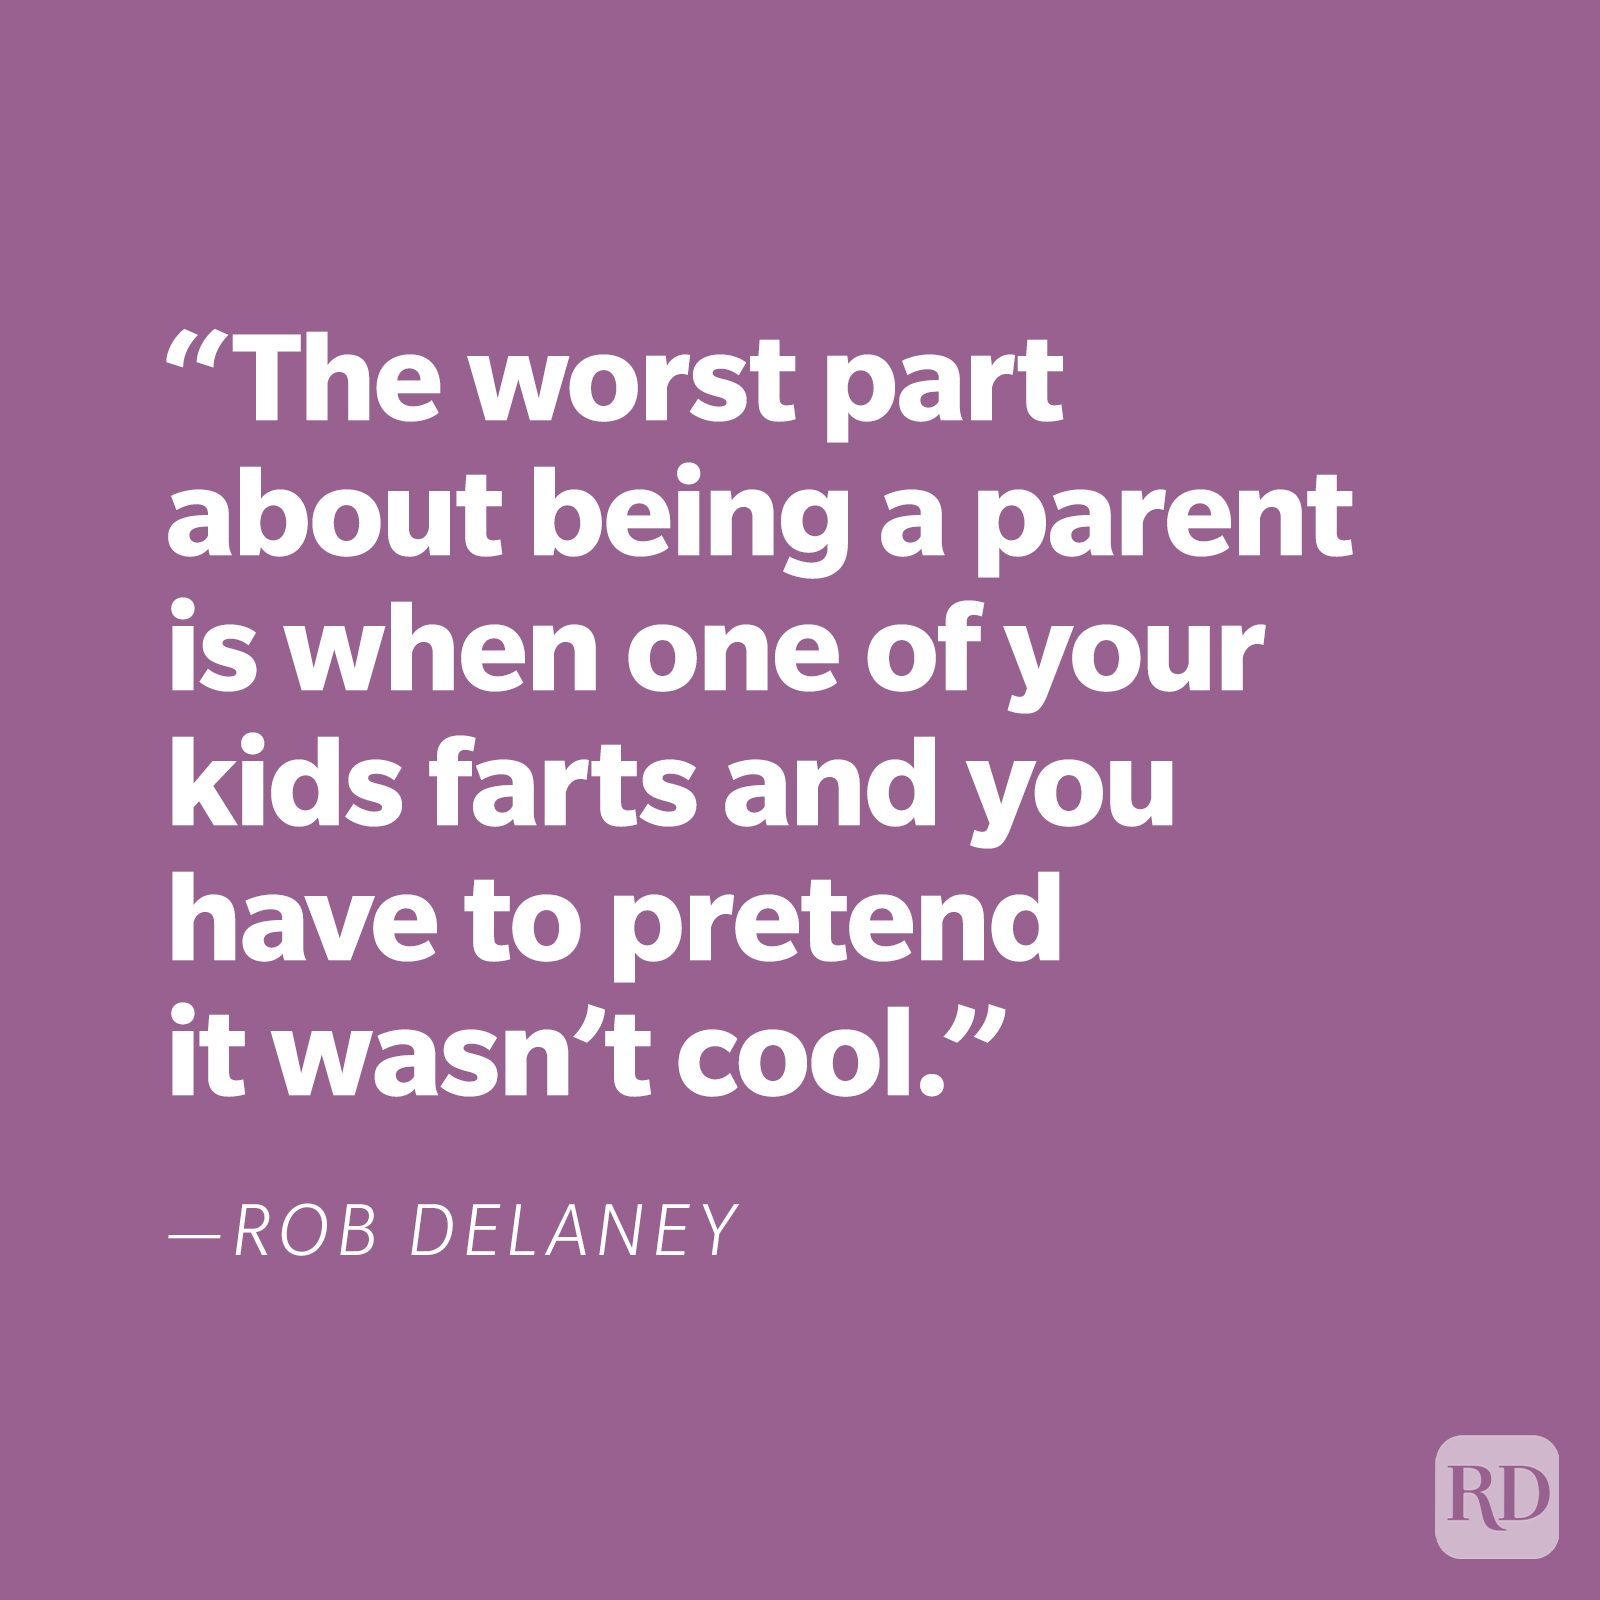 "The worst part about being a parent is when one of your kids farts and you have to pretend it wasn't cool." —Rob Delaney 